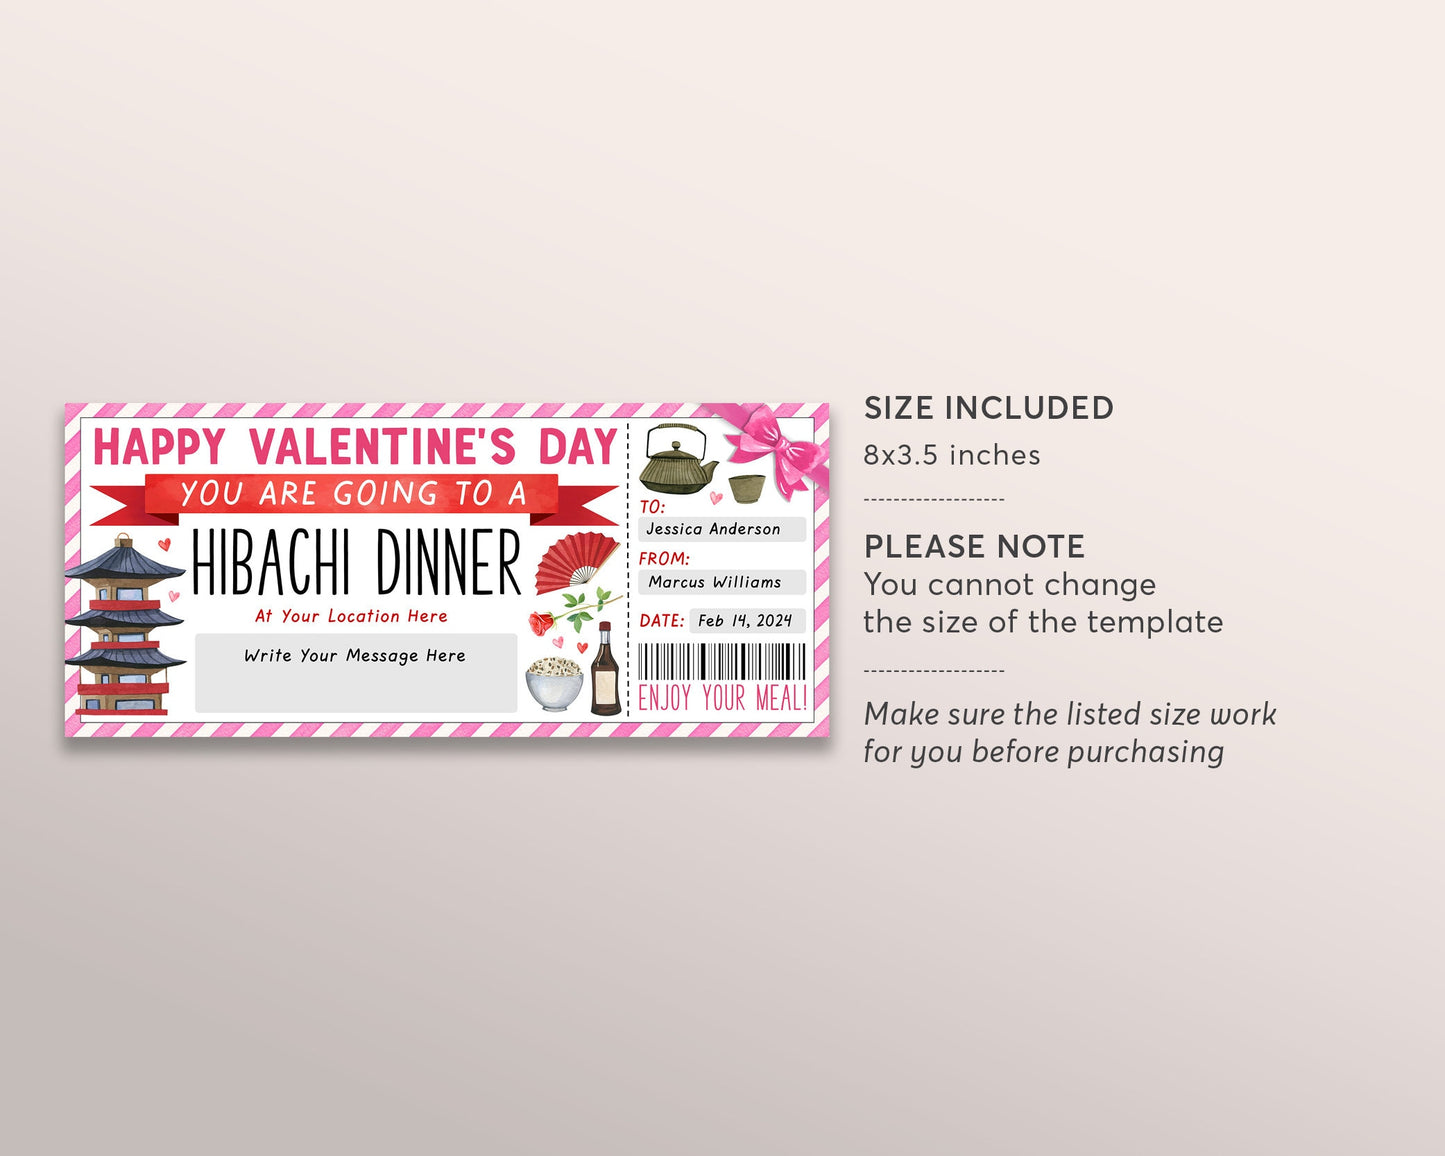 Valentines Day Hibachi Dinner Ticket Voucher Editable Template, Anniversary Hibachi Japanese Cuisine Restaurant Date Coupon Gift Certificate